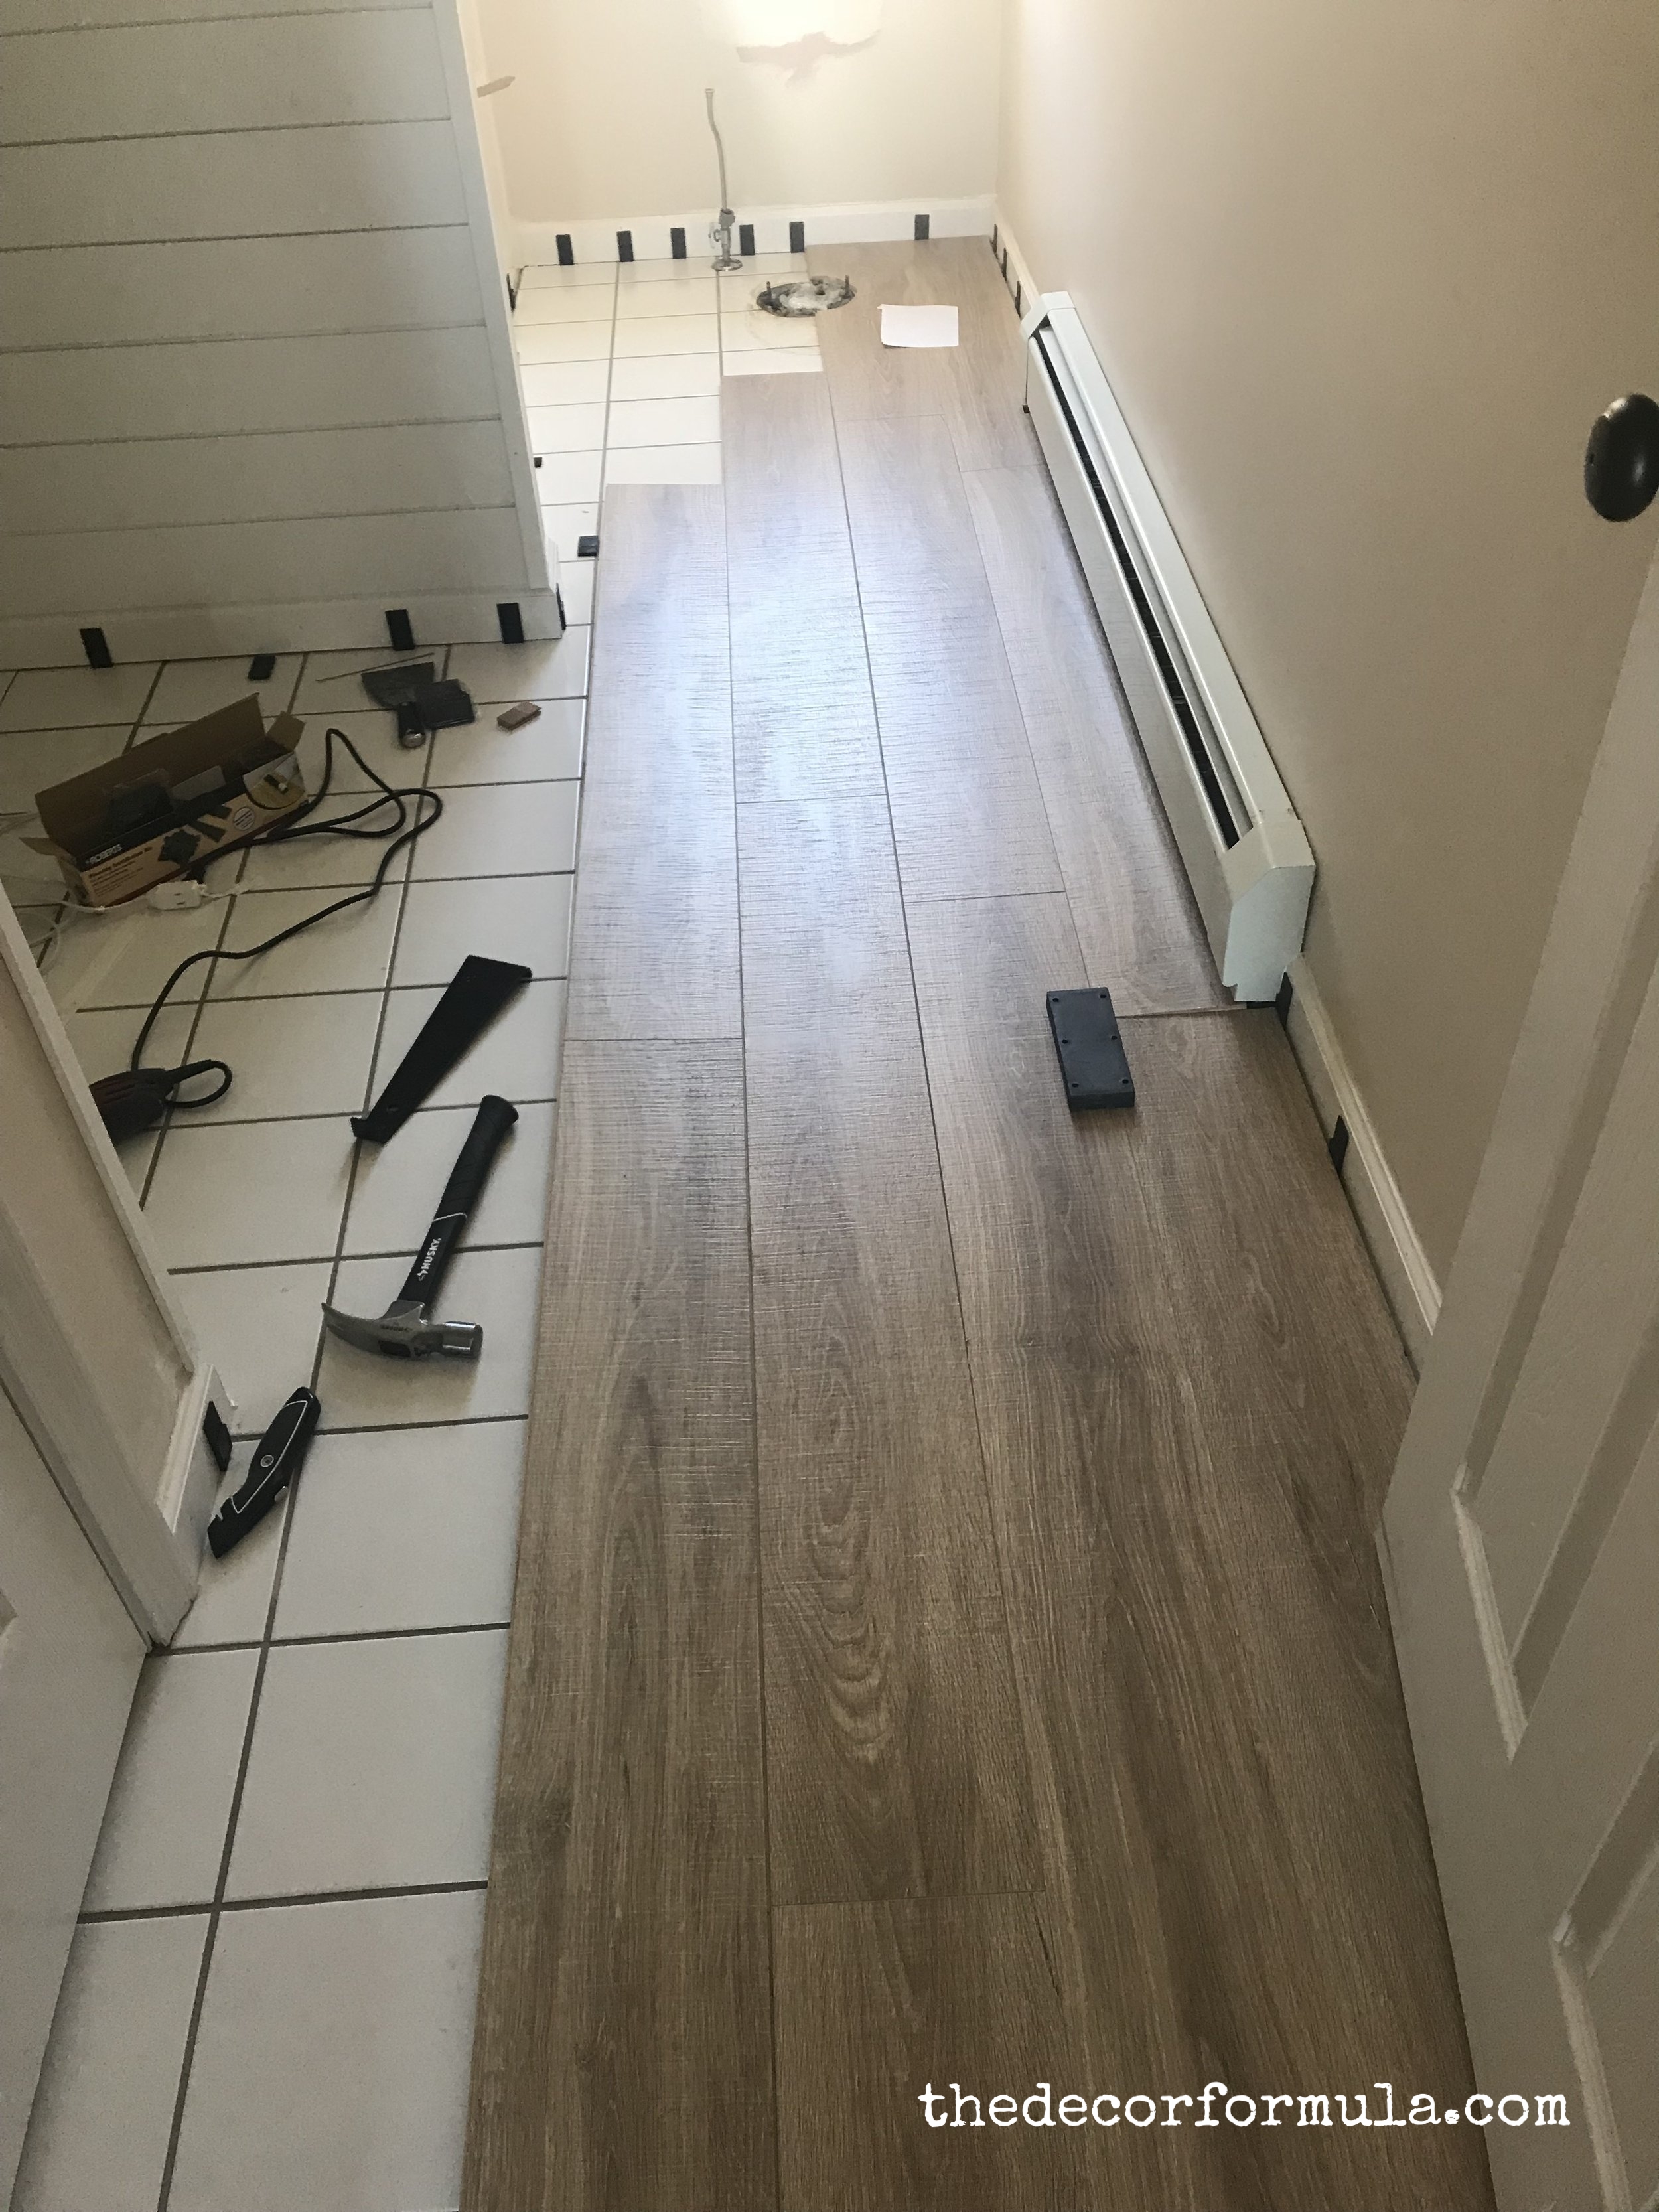 Ideas For Covering Up Tile Floors, How To Install Floating Floor Over Ceramic Tile